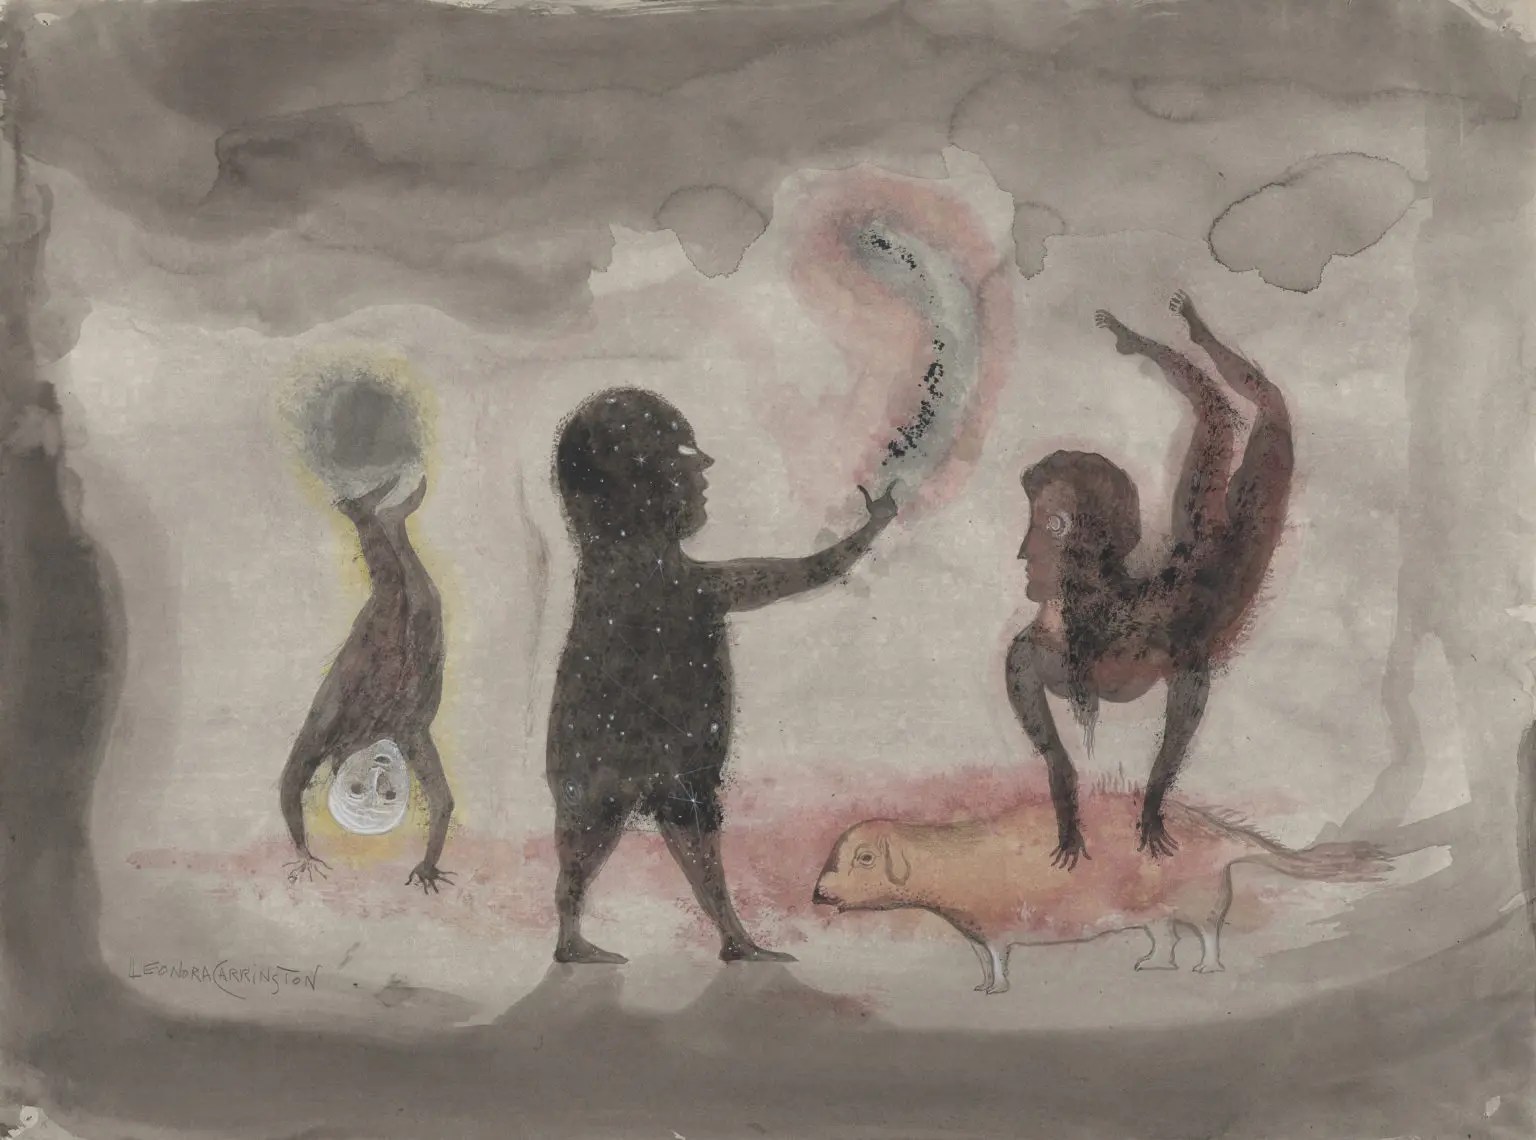 The exhibition also celebrates the importance of women artists that were kept at the margins of the official records of the surrealist movements, such as the British-Mexican Leonora Carrington (1917-2011), present in Lausanne with her painting "Acrobats" (1981). In May 2024, one of Carrington's works was auctioned in New York for US$ 29 million.